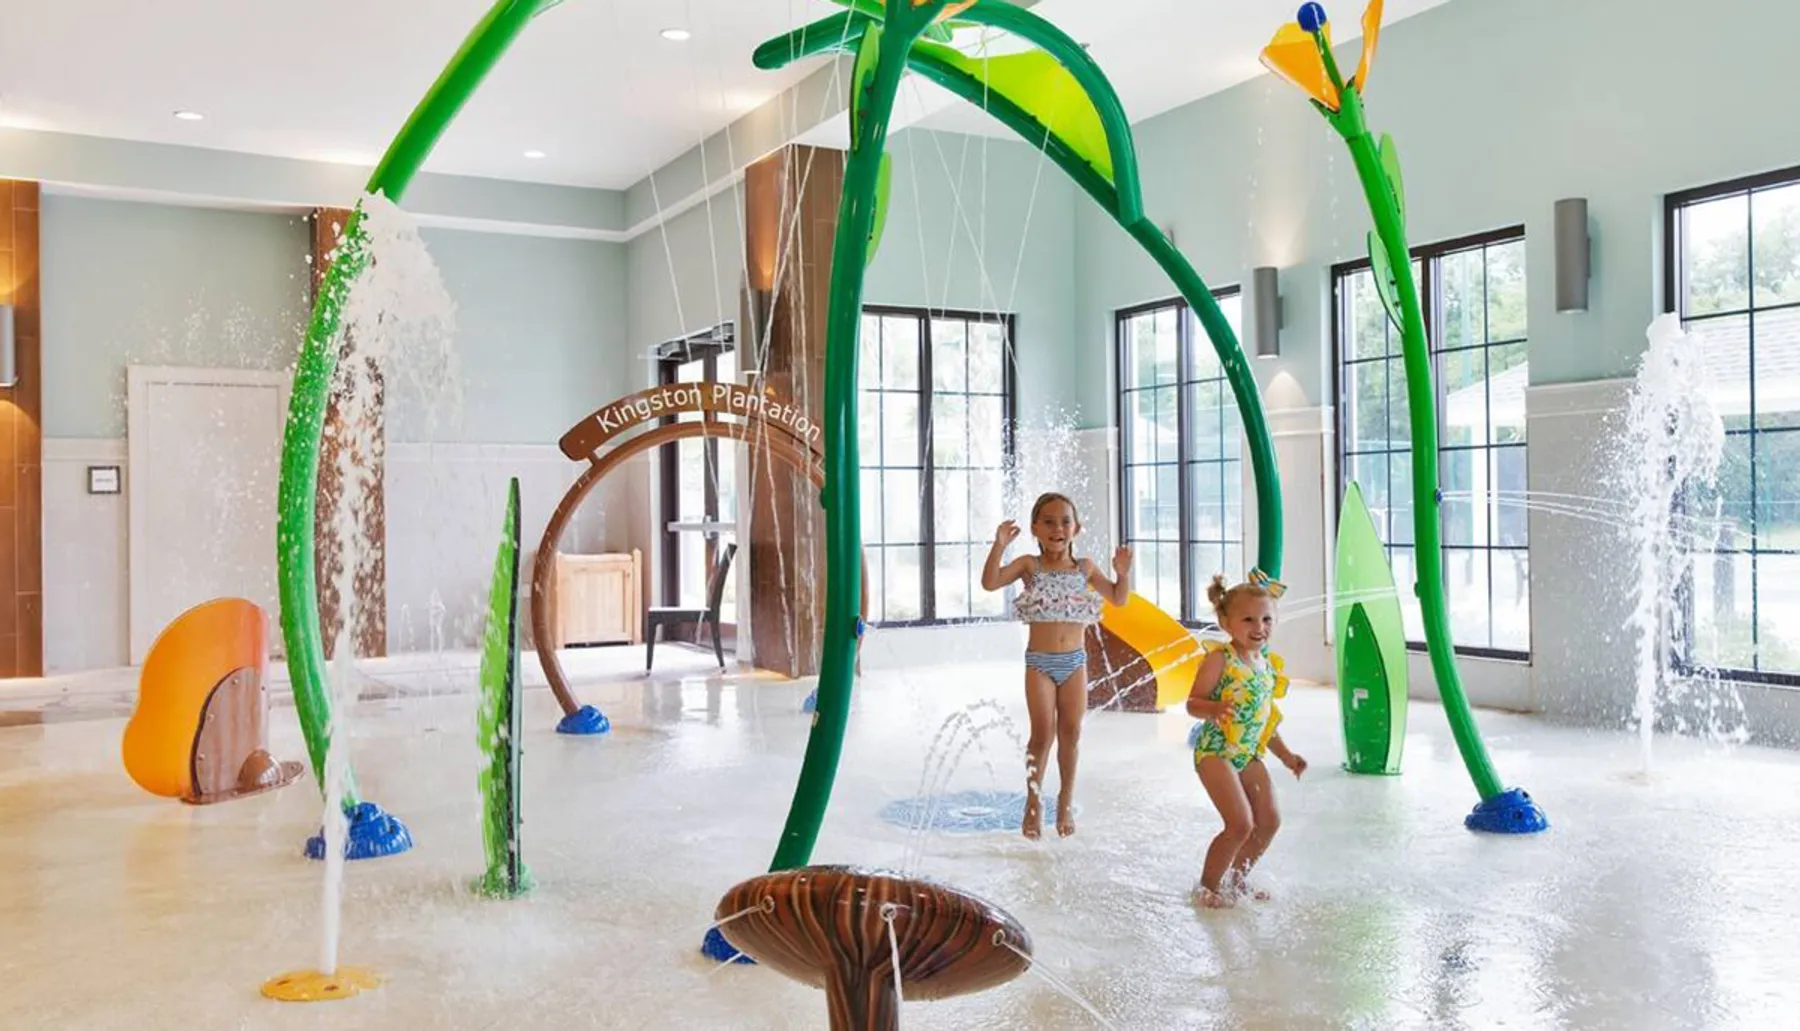 Two children play gleefully in an indoor water park with colorful water features and sprays around them.